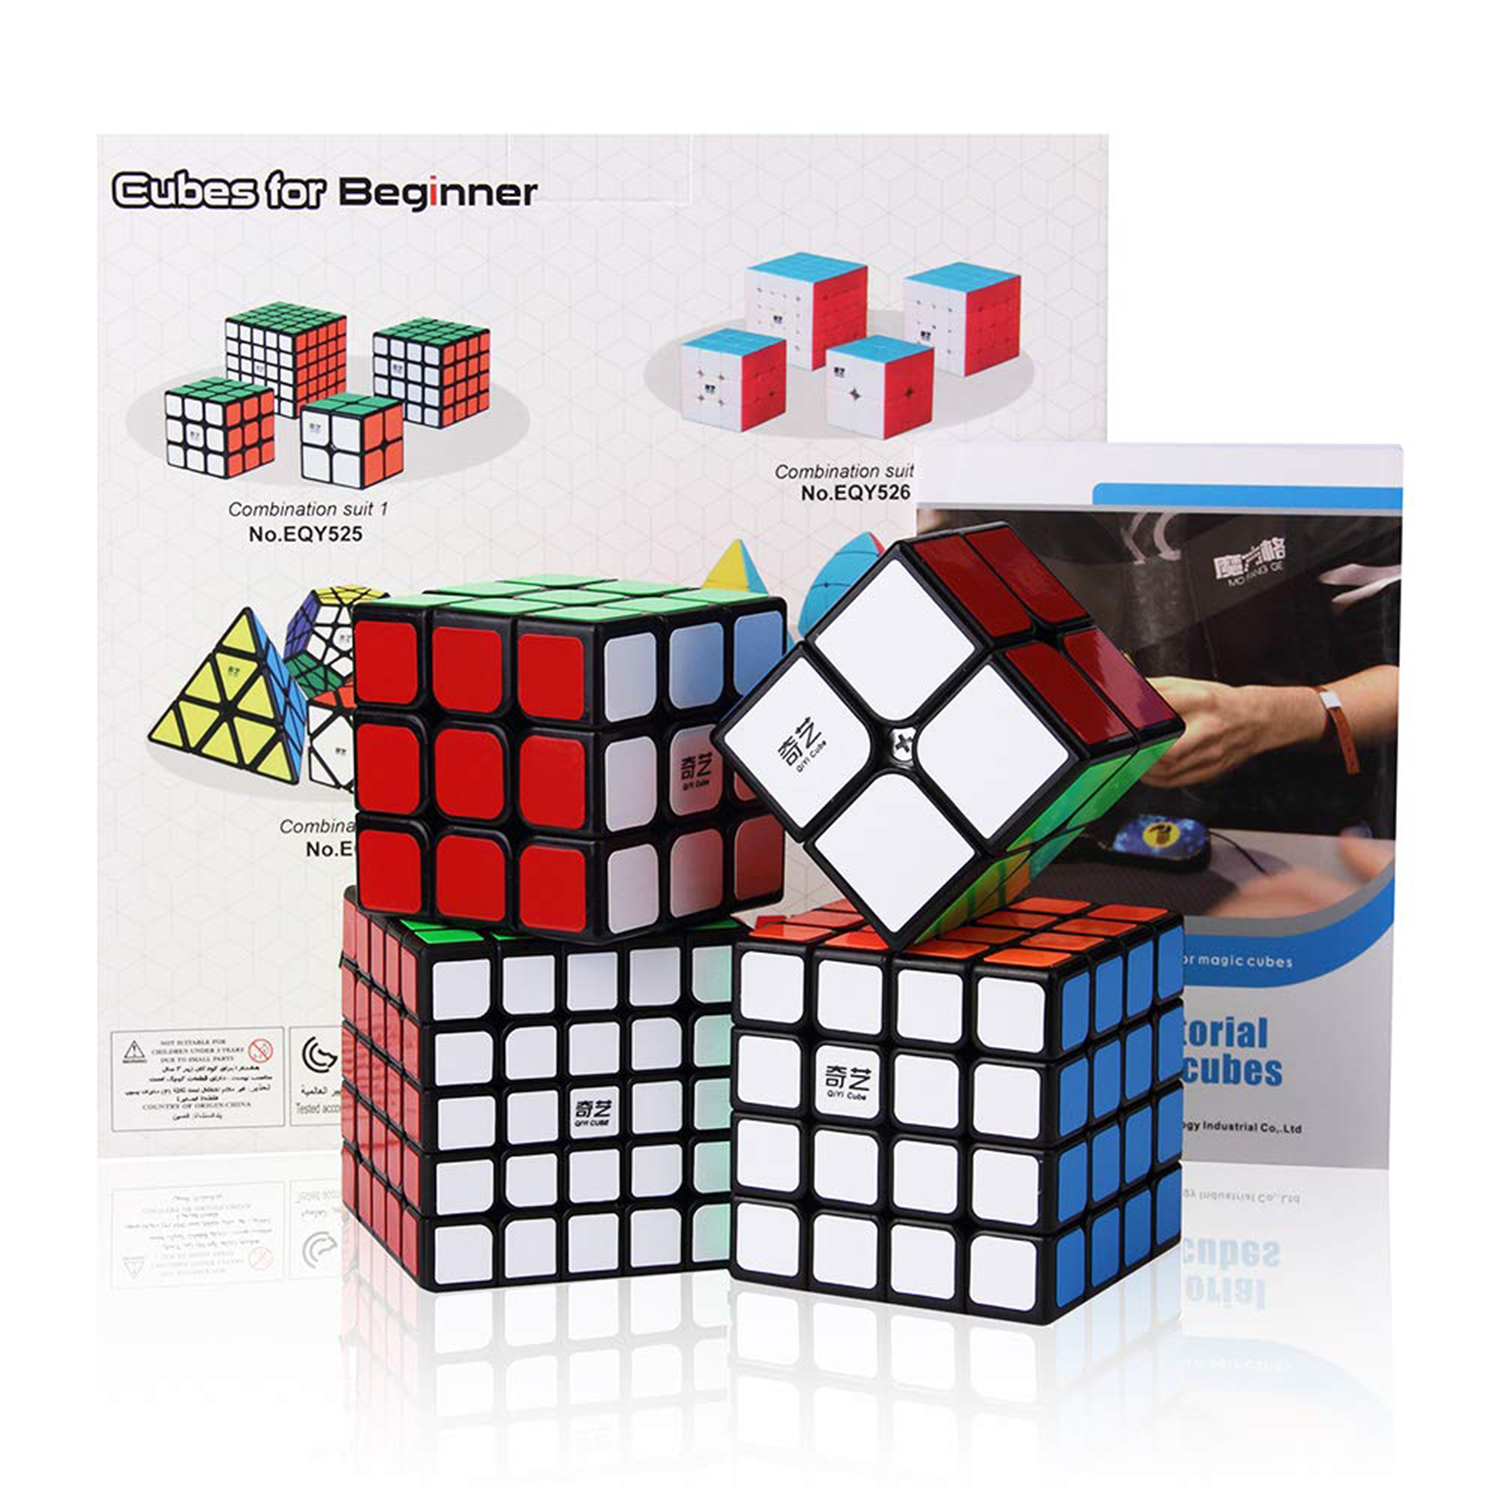 How to Solve a 5x5x5 Rubik's Cube FOR BEGINNERS 